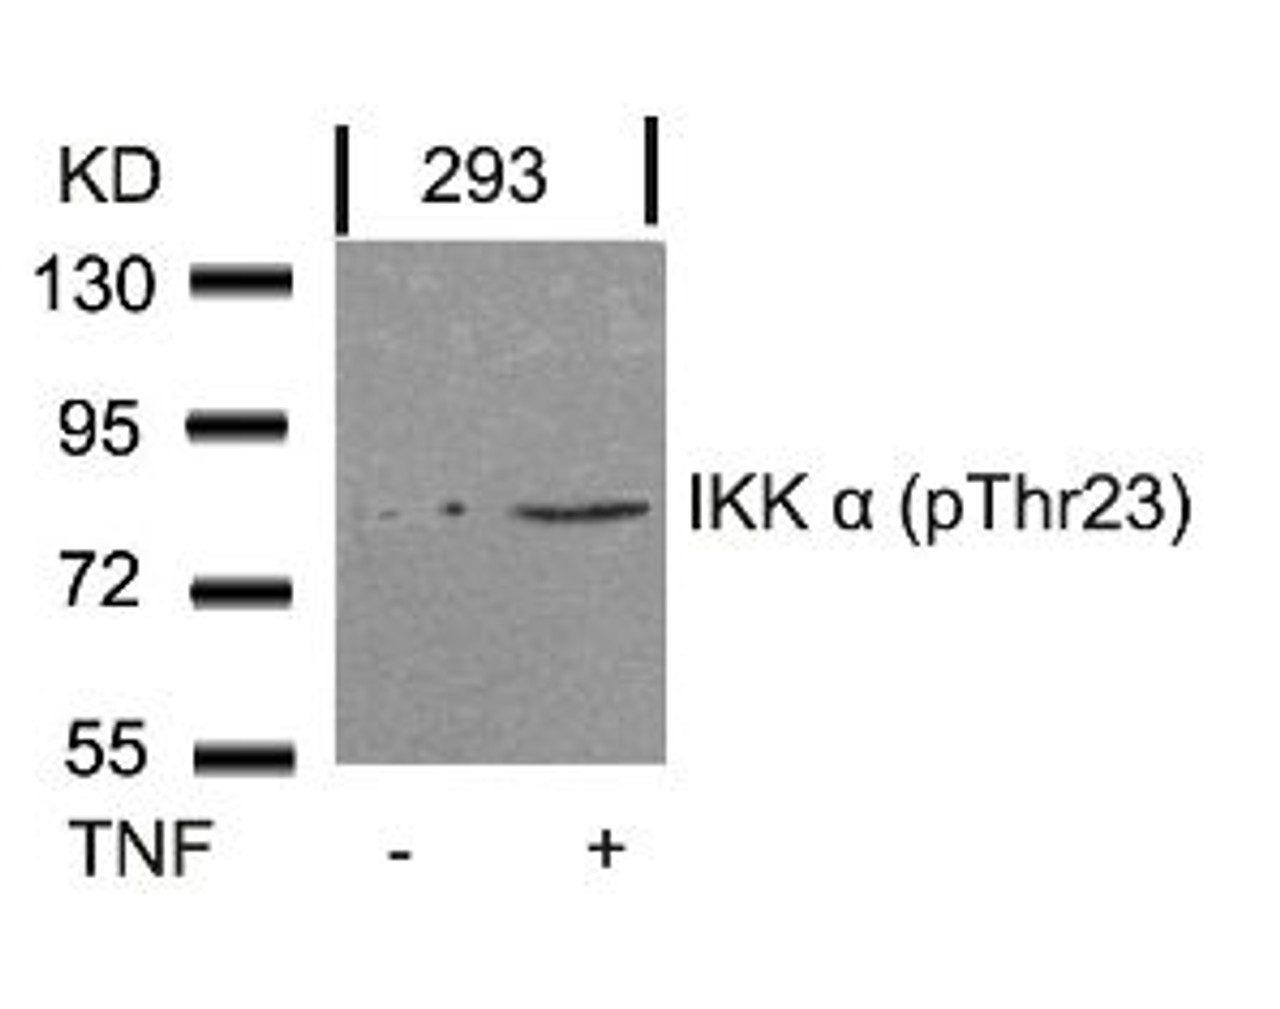 Western blot analysis of lysed extracts from 293 cells untreated or treated with TNF using IKK &#945; (Phospho-Thr23) .